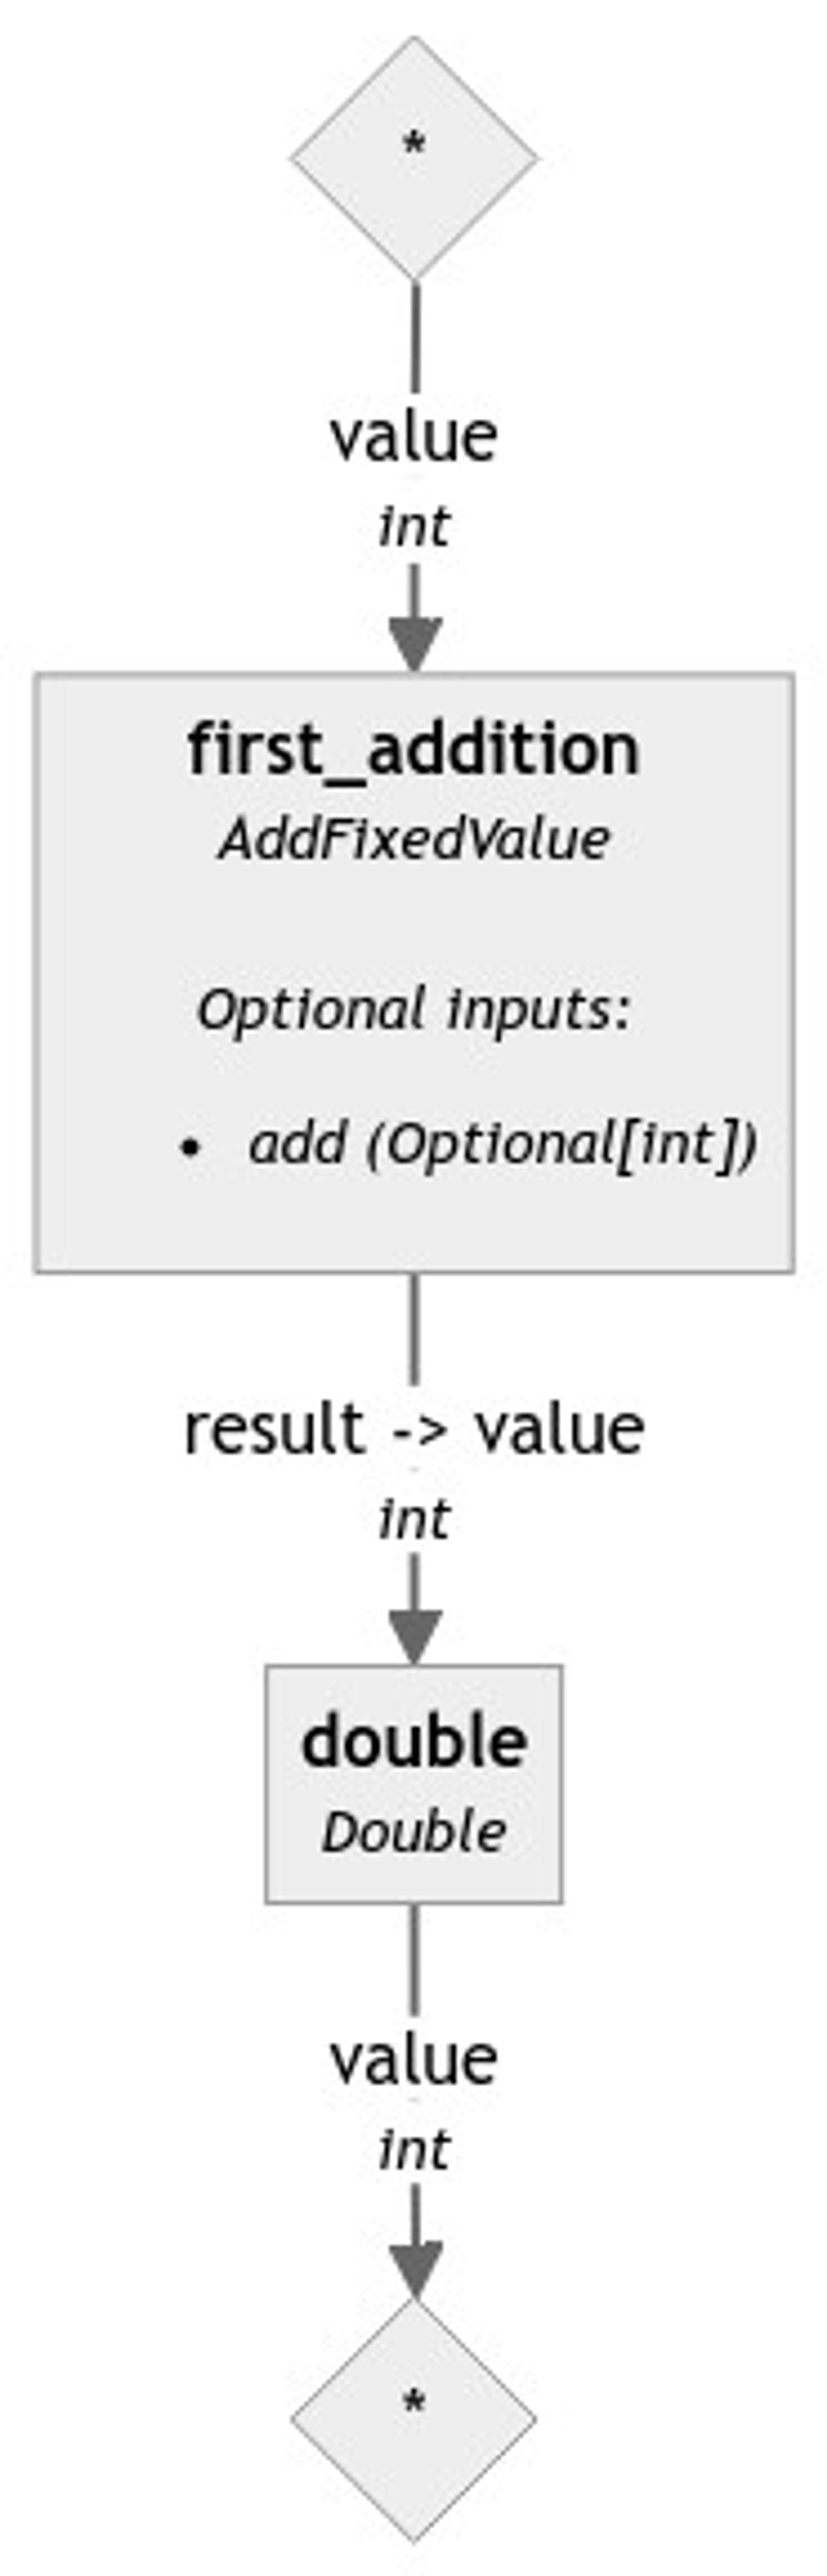 This is a diagram representing the workflow of a Haystack Pipeline named test_pipeline_01. It begins with an input of type int named value, which is required to start the Pipeline. Optionally, another input of type int named add can be passed. After processing these inputs, the Pipeline returns an output of type int named result.